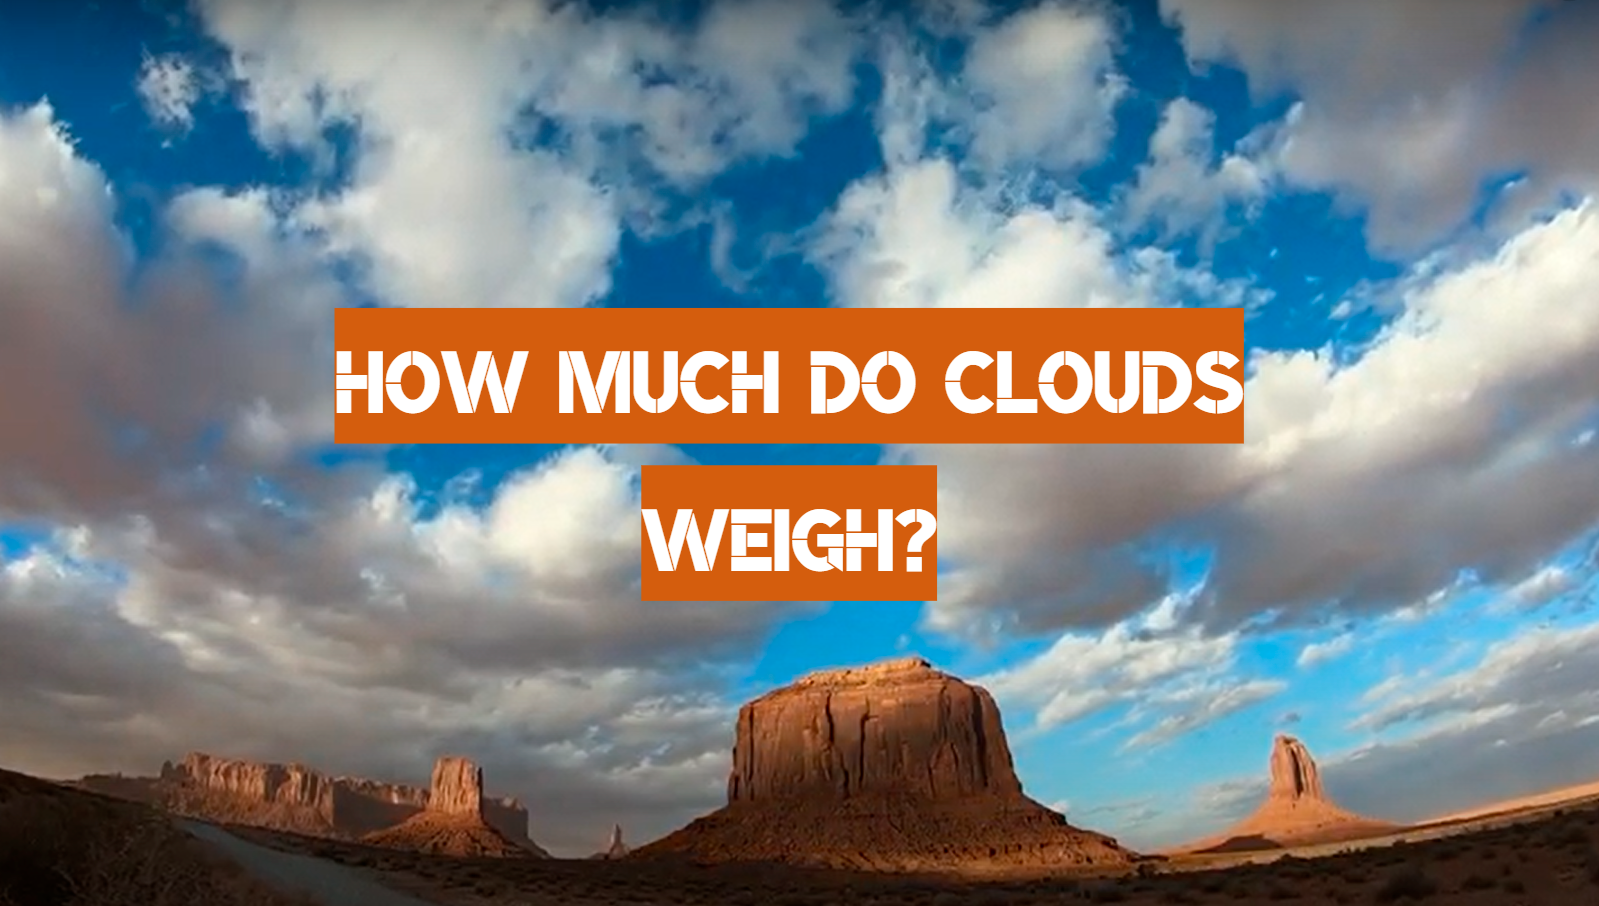 How Much Do Clouds Weigh?